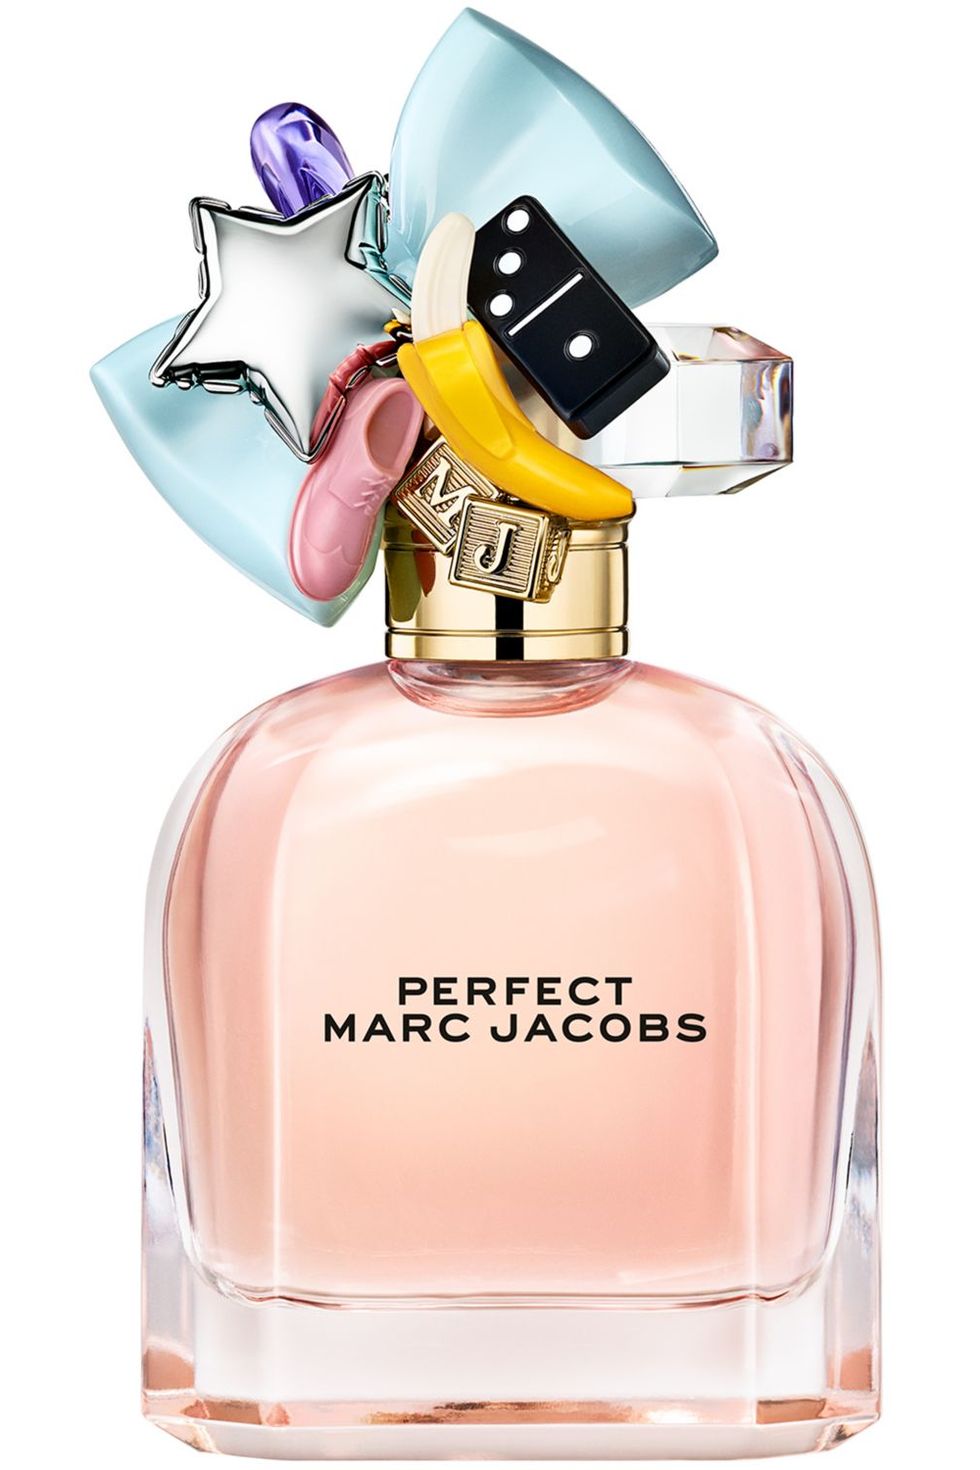 Marc Jacobs Perfect Interview Perfume Review - Marc Jacobs New